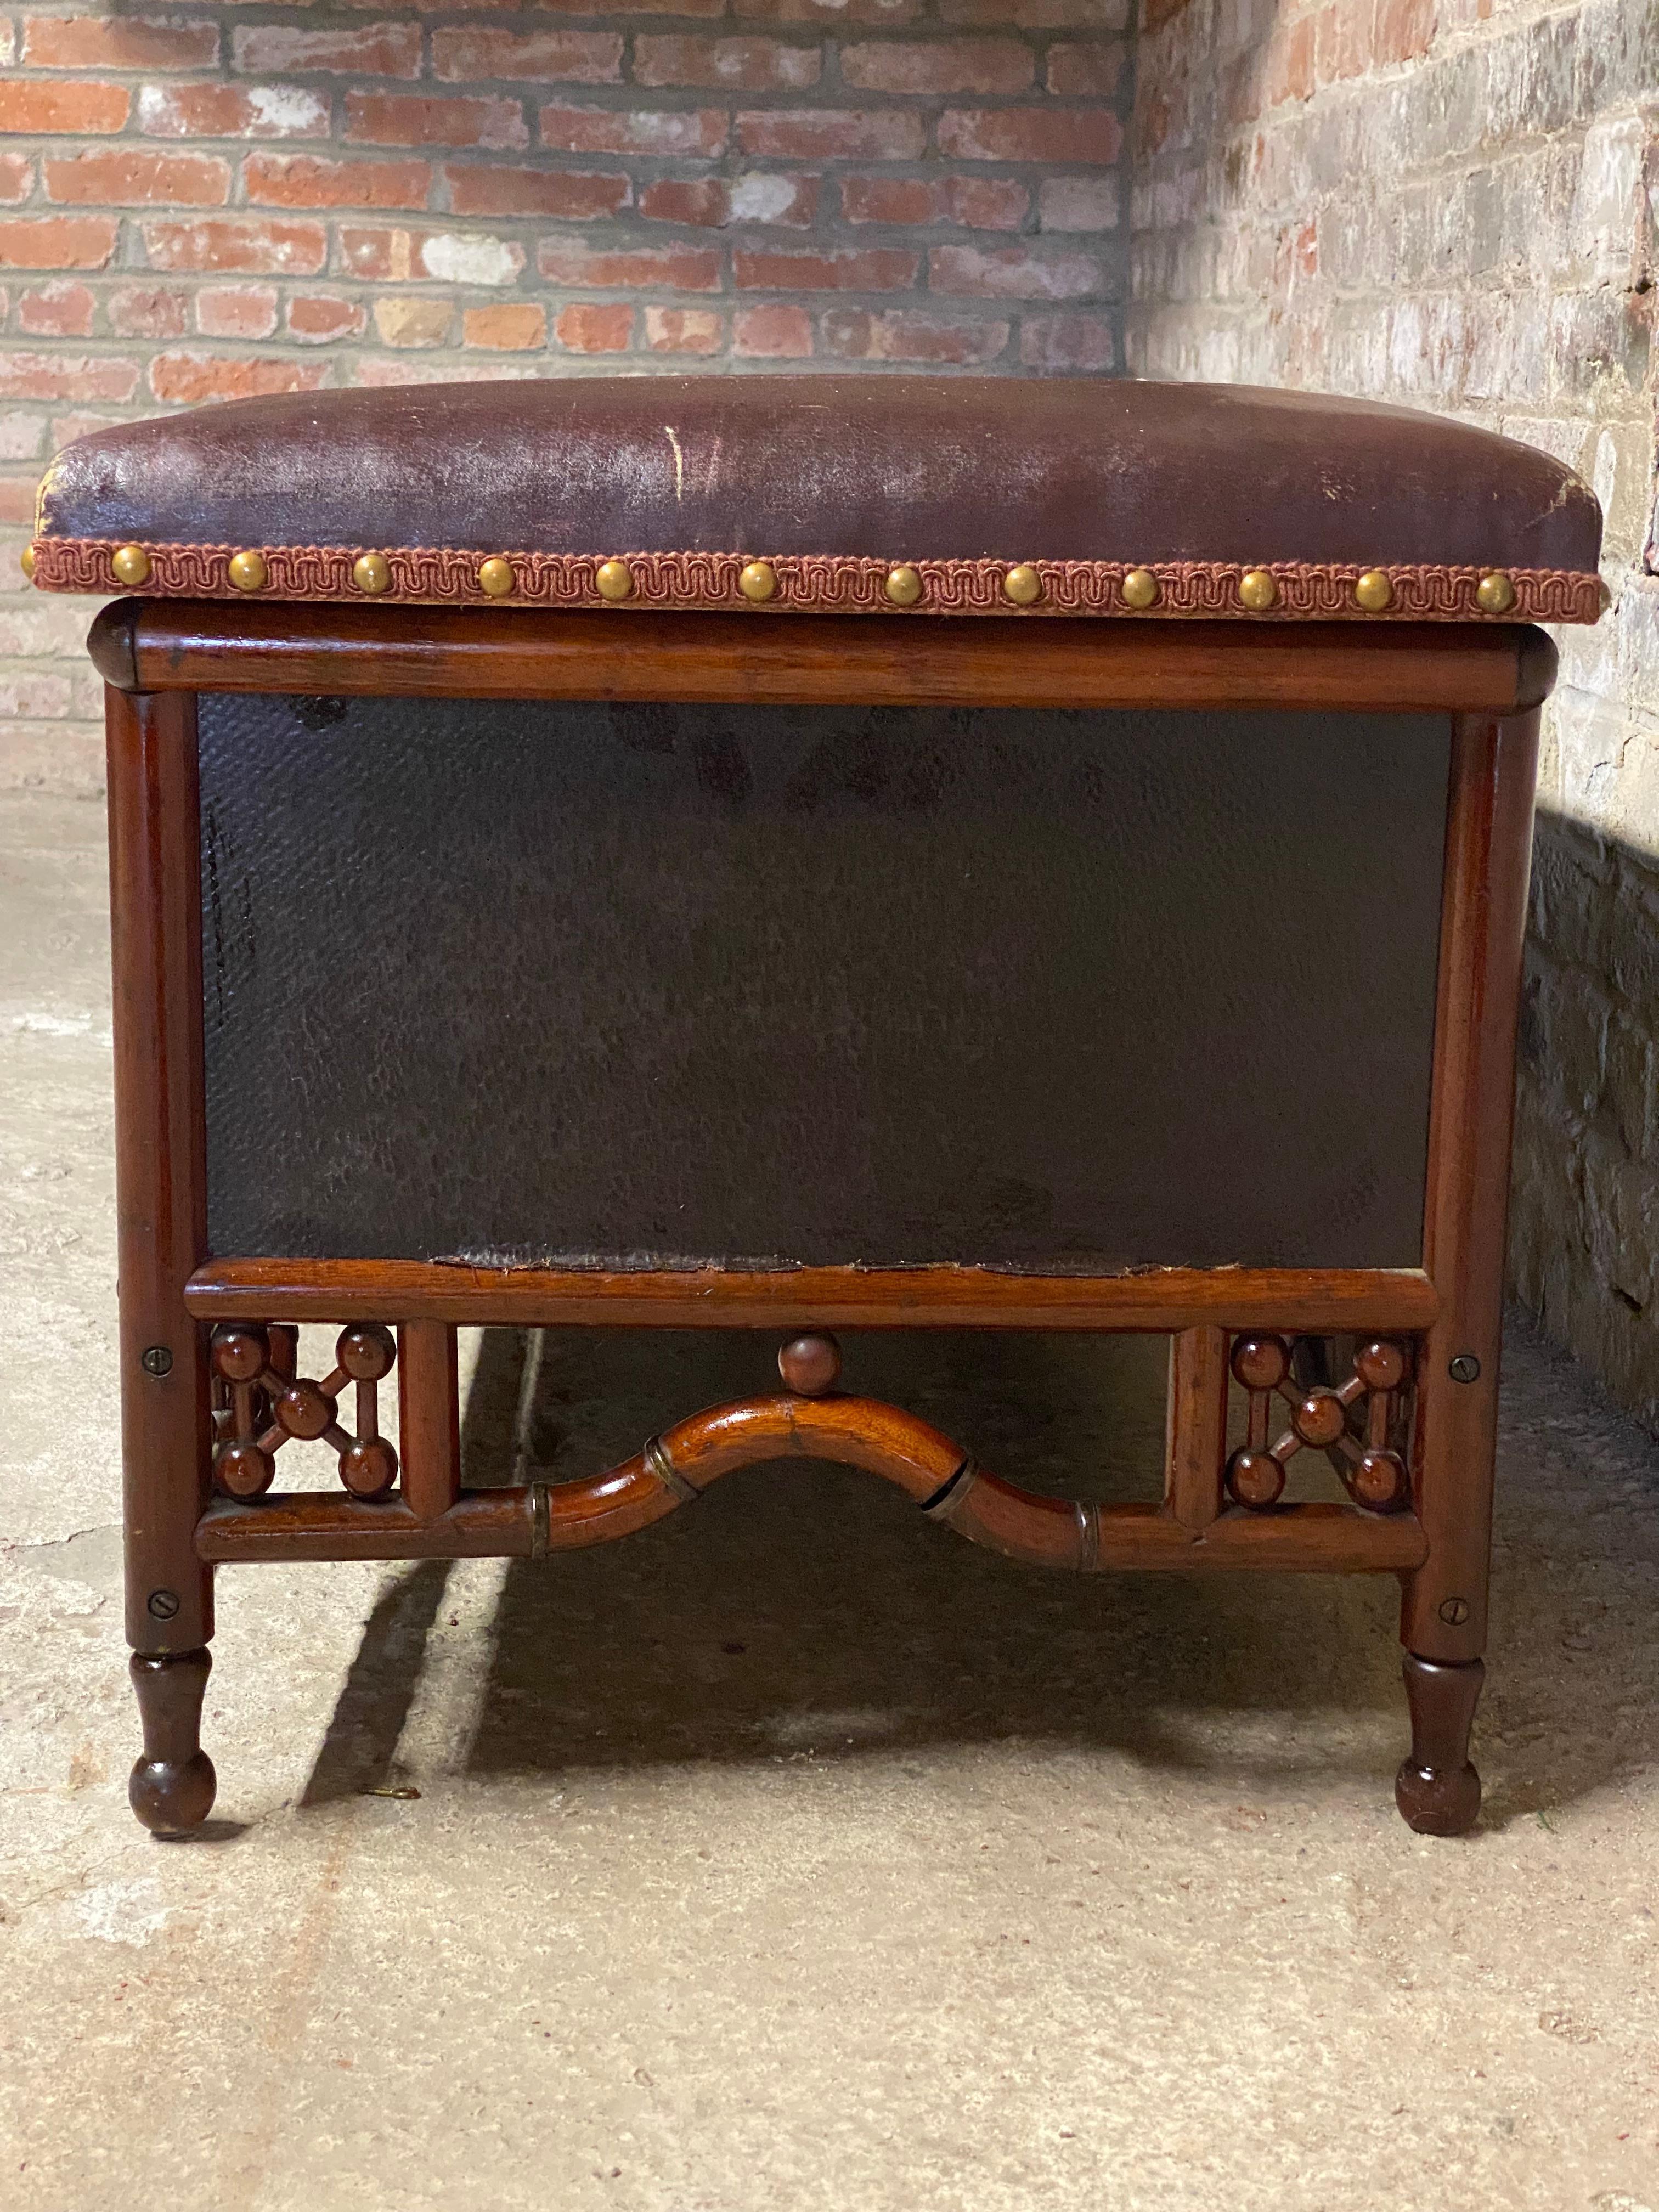 Enameled Victorian Stick and Ball Blanket Chest